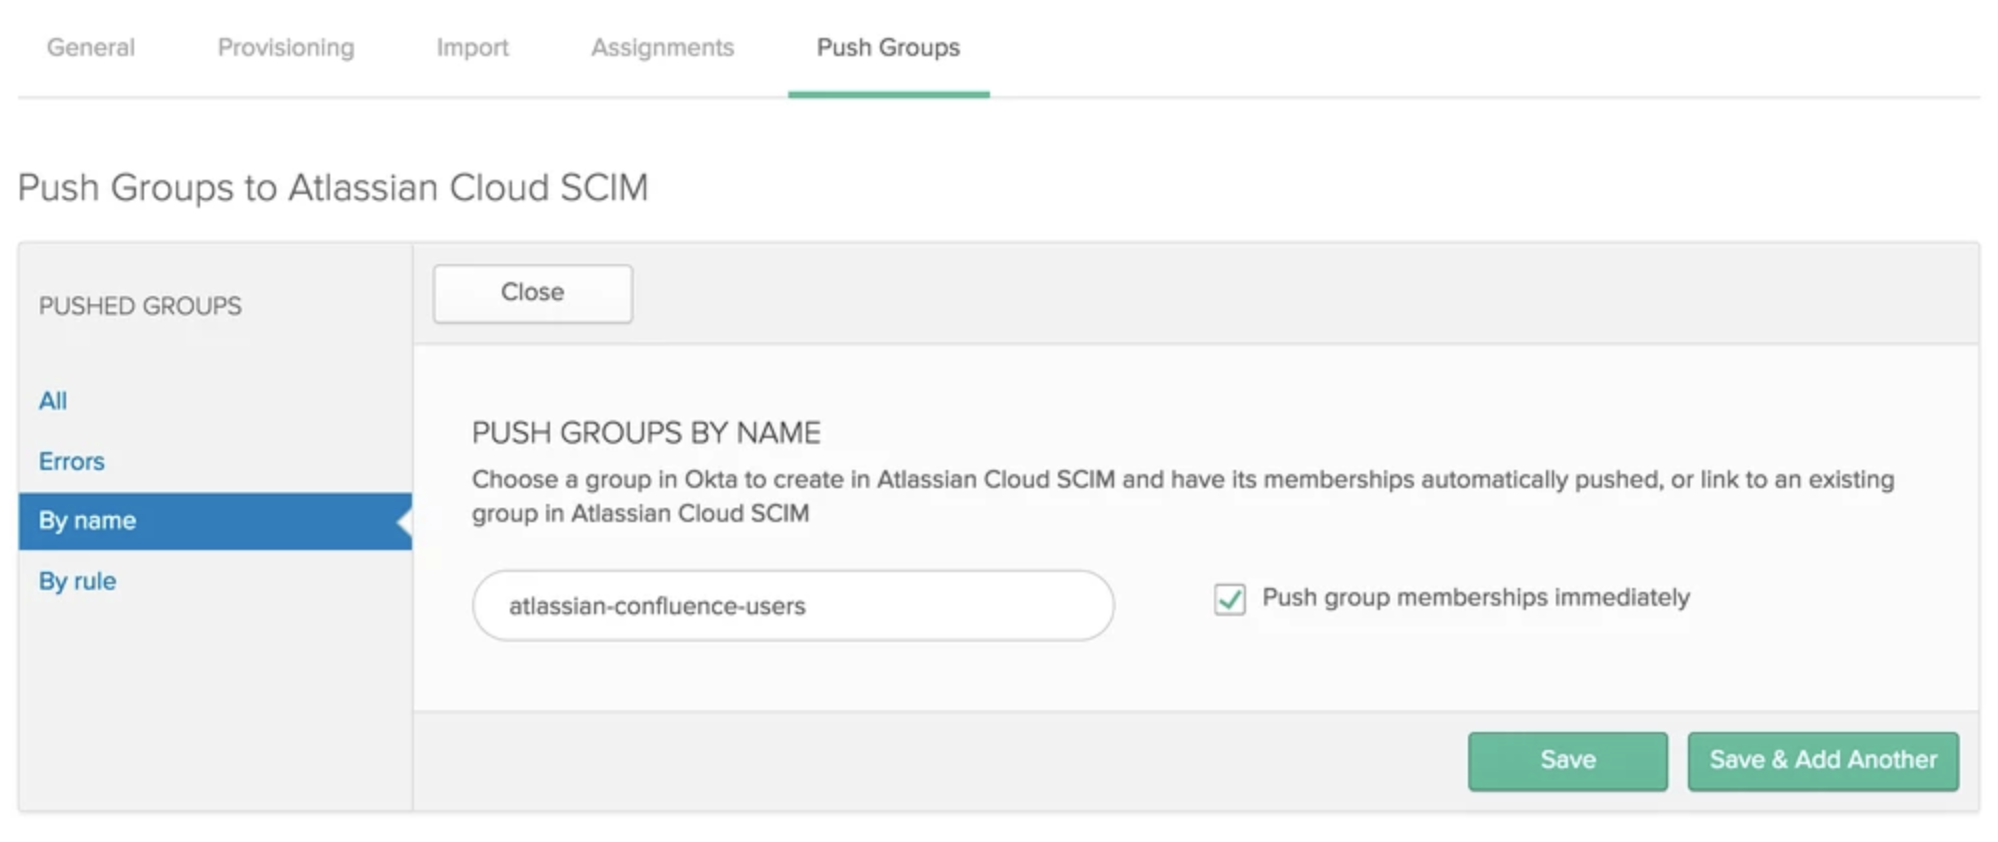 Push groups to Atlassian cloud SCIM screen. Top menu on Push Groups, side menu on By name. Group names to choose from.